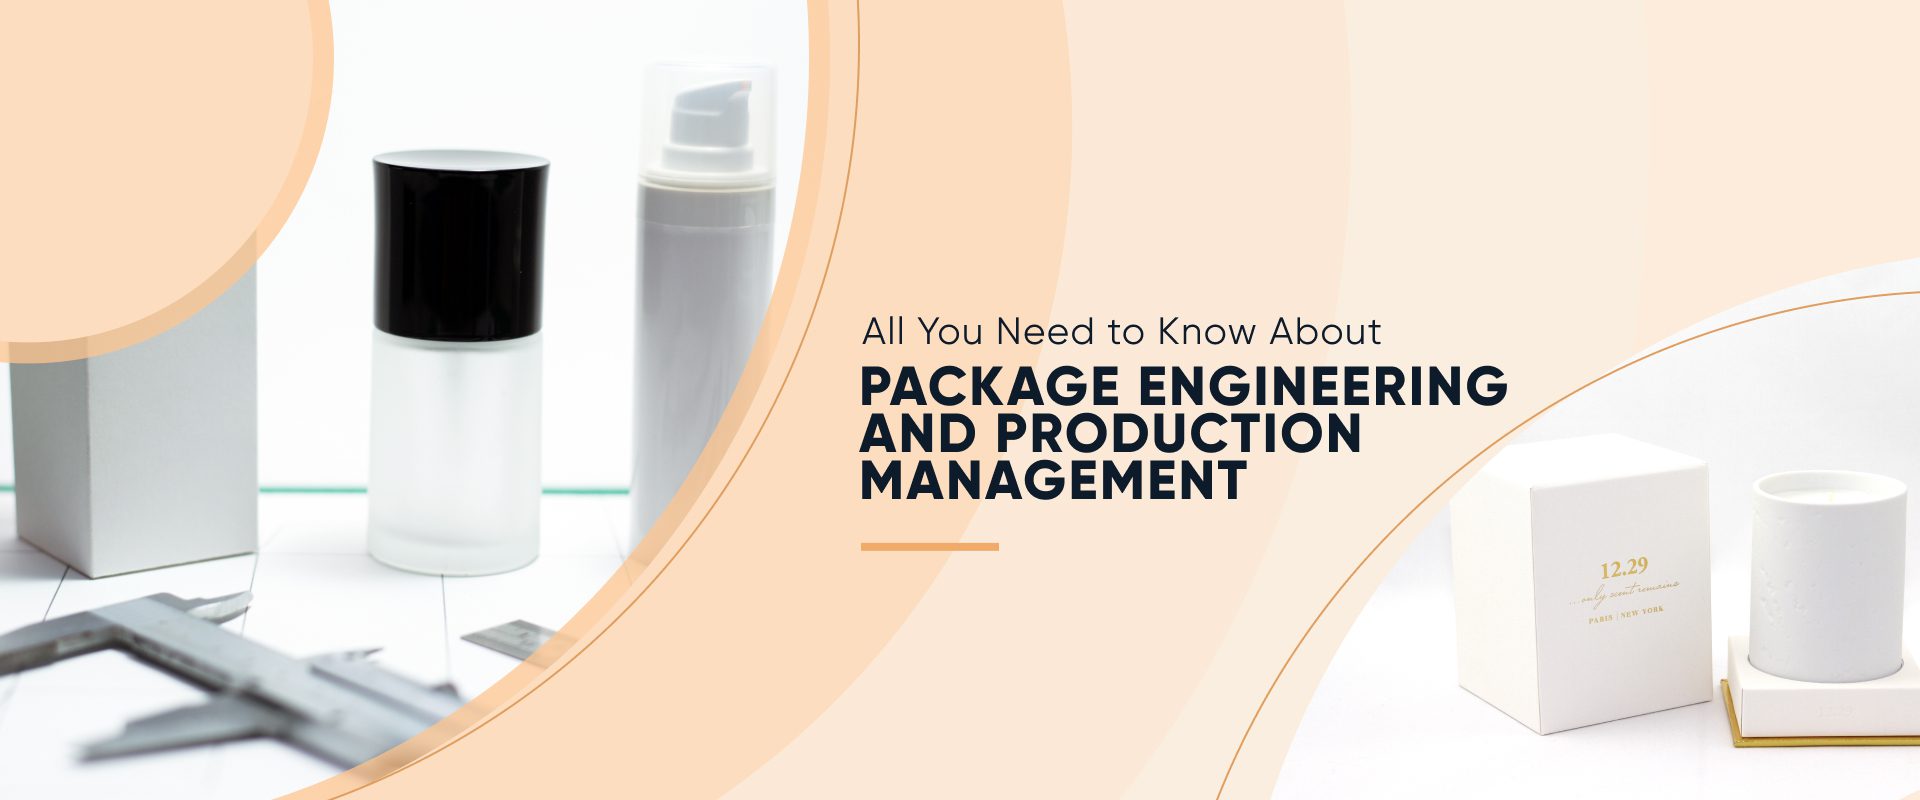 All You Need to Know About Package Engineering & Production Management